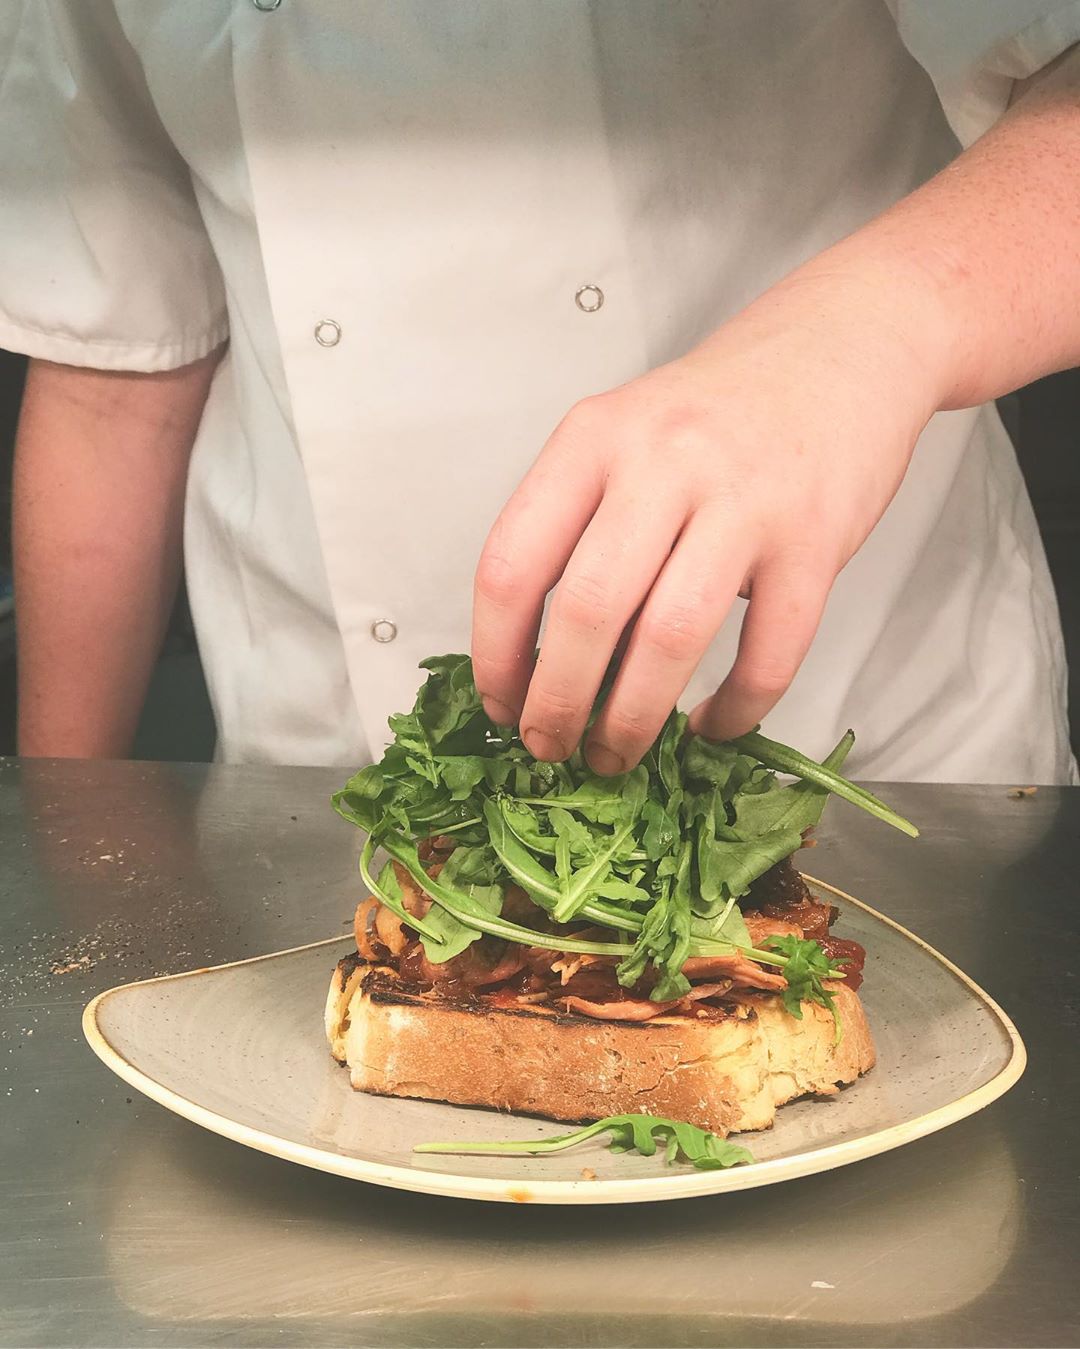 We are on the hunt for a Kitchen Supervisor with a passion for fresh, local & exciting food!! Interested in the challenge… for more details head over to:
http://cranstons.net/contact/jobs/
.
.
#cumbriajobs #chef #chefjob #penrith #cumbria